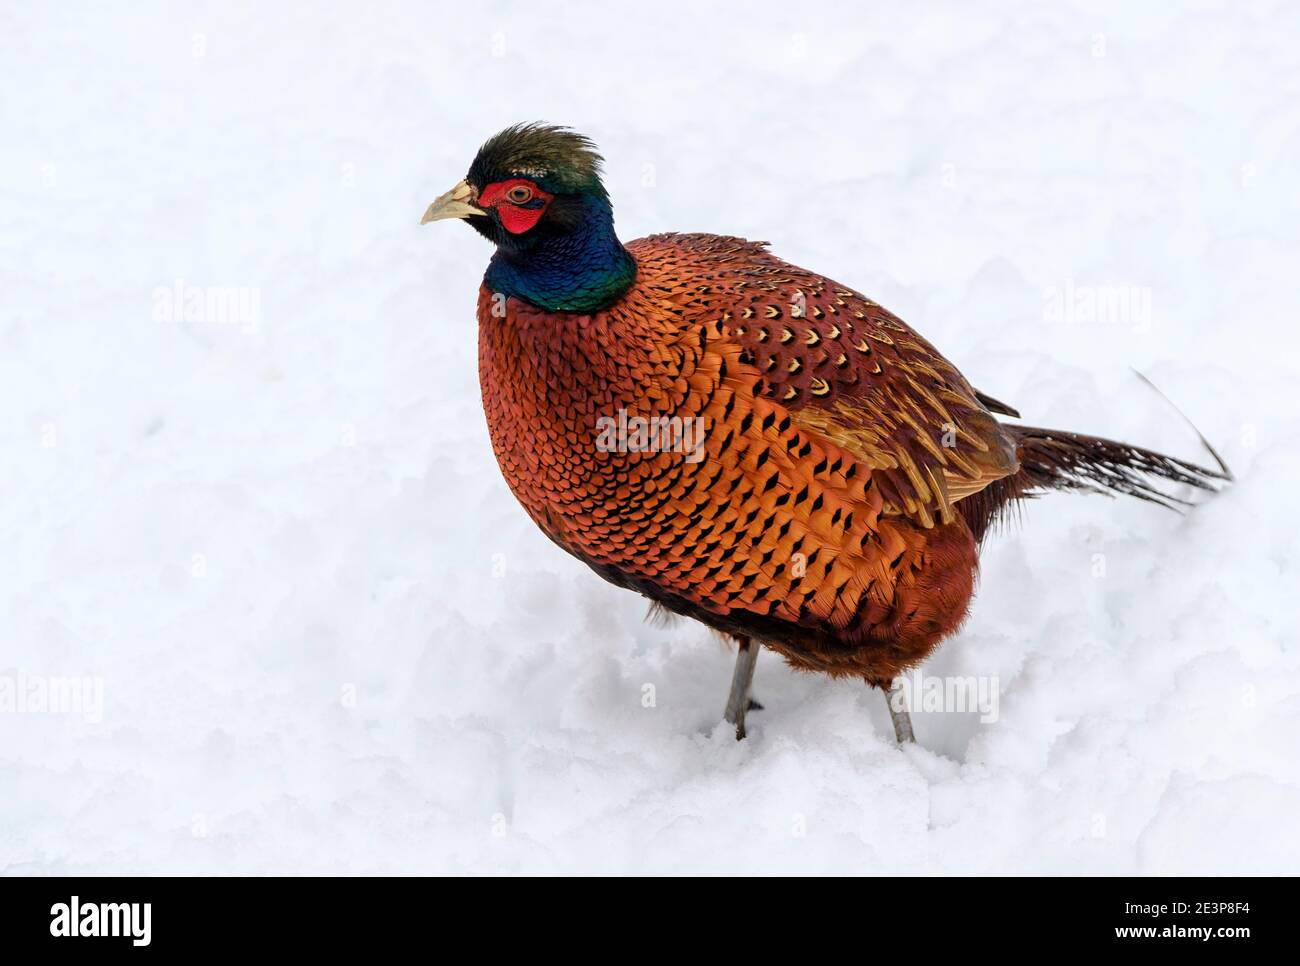 Male pheasant (Phasianus colchicus) in the snow, South Lanarkshire, Scotland Stock Photo